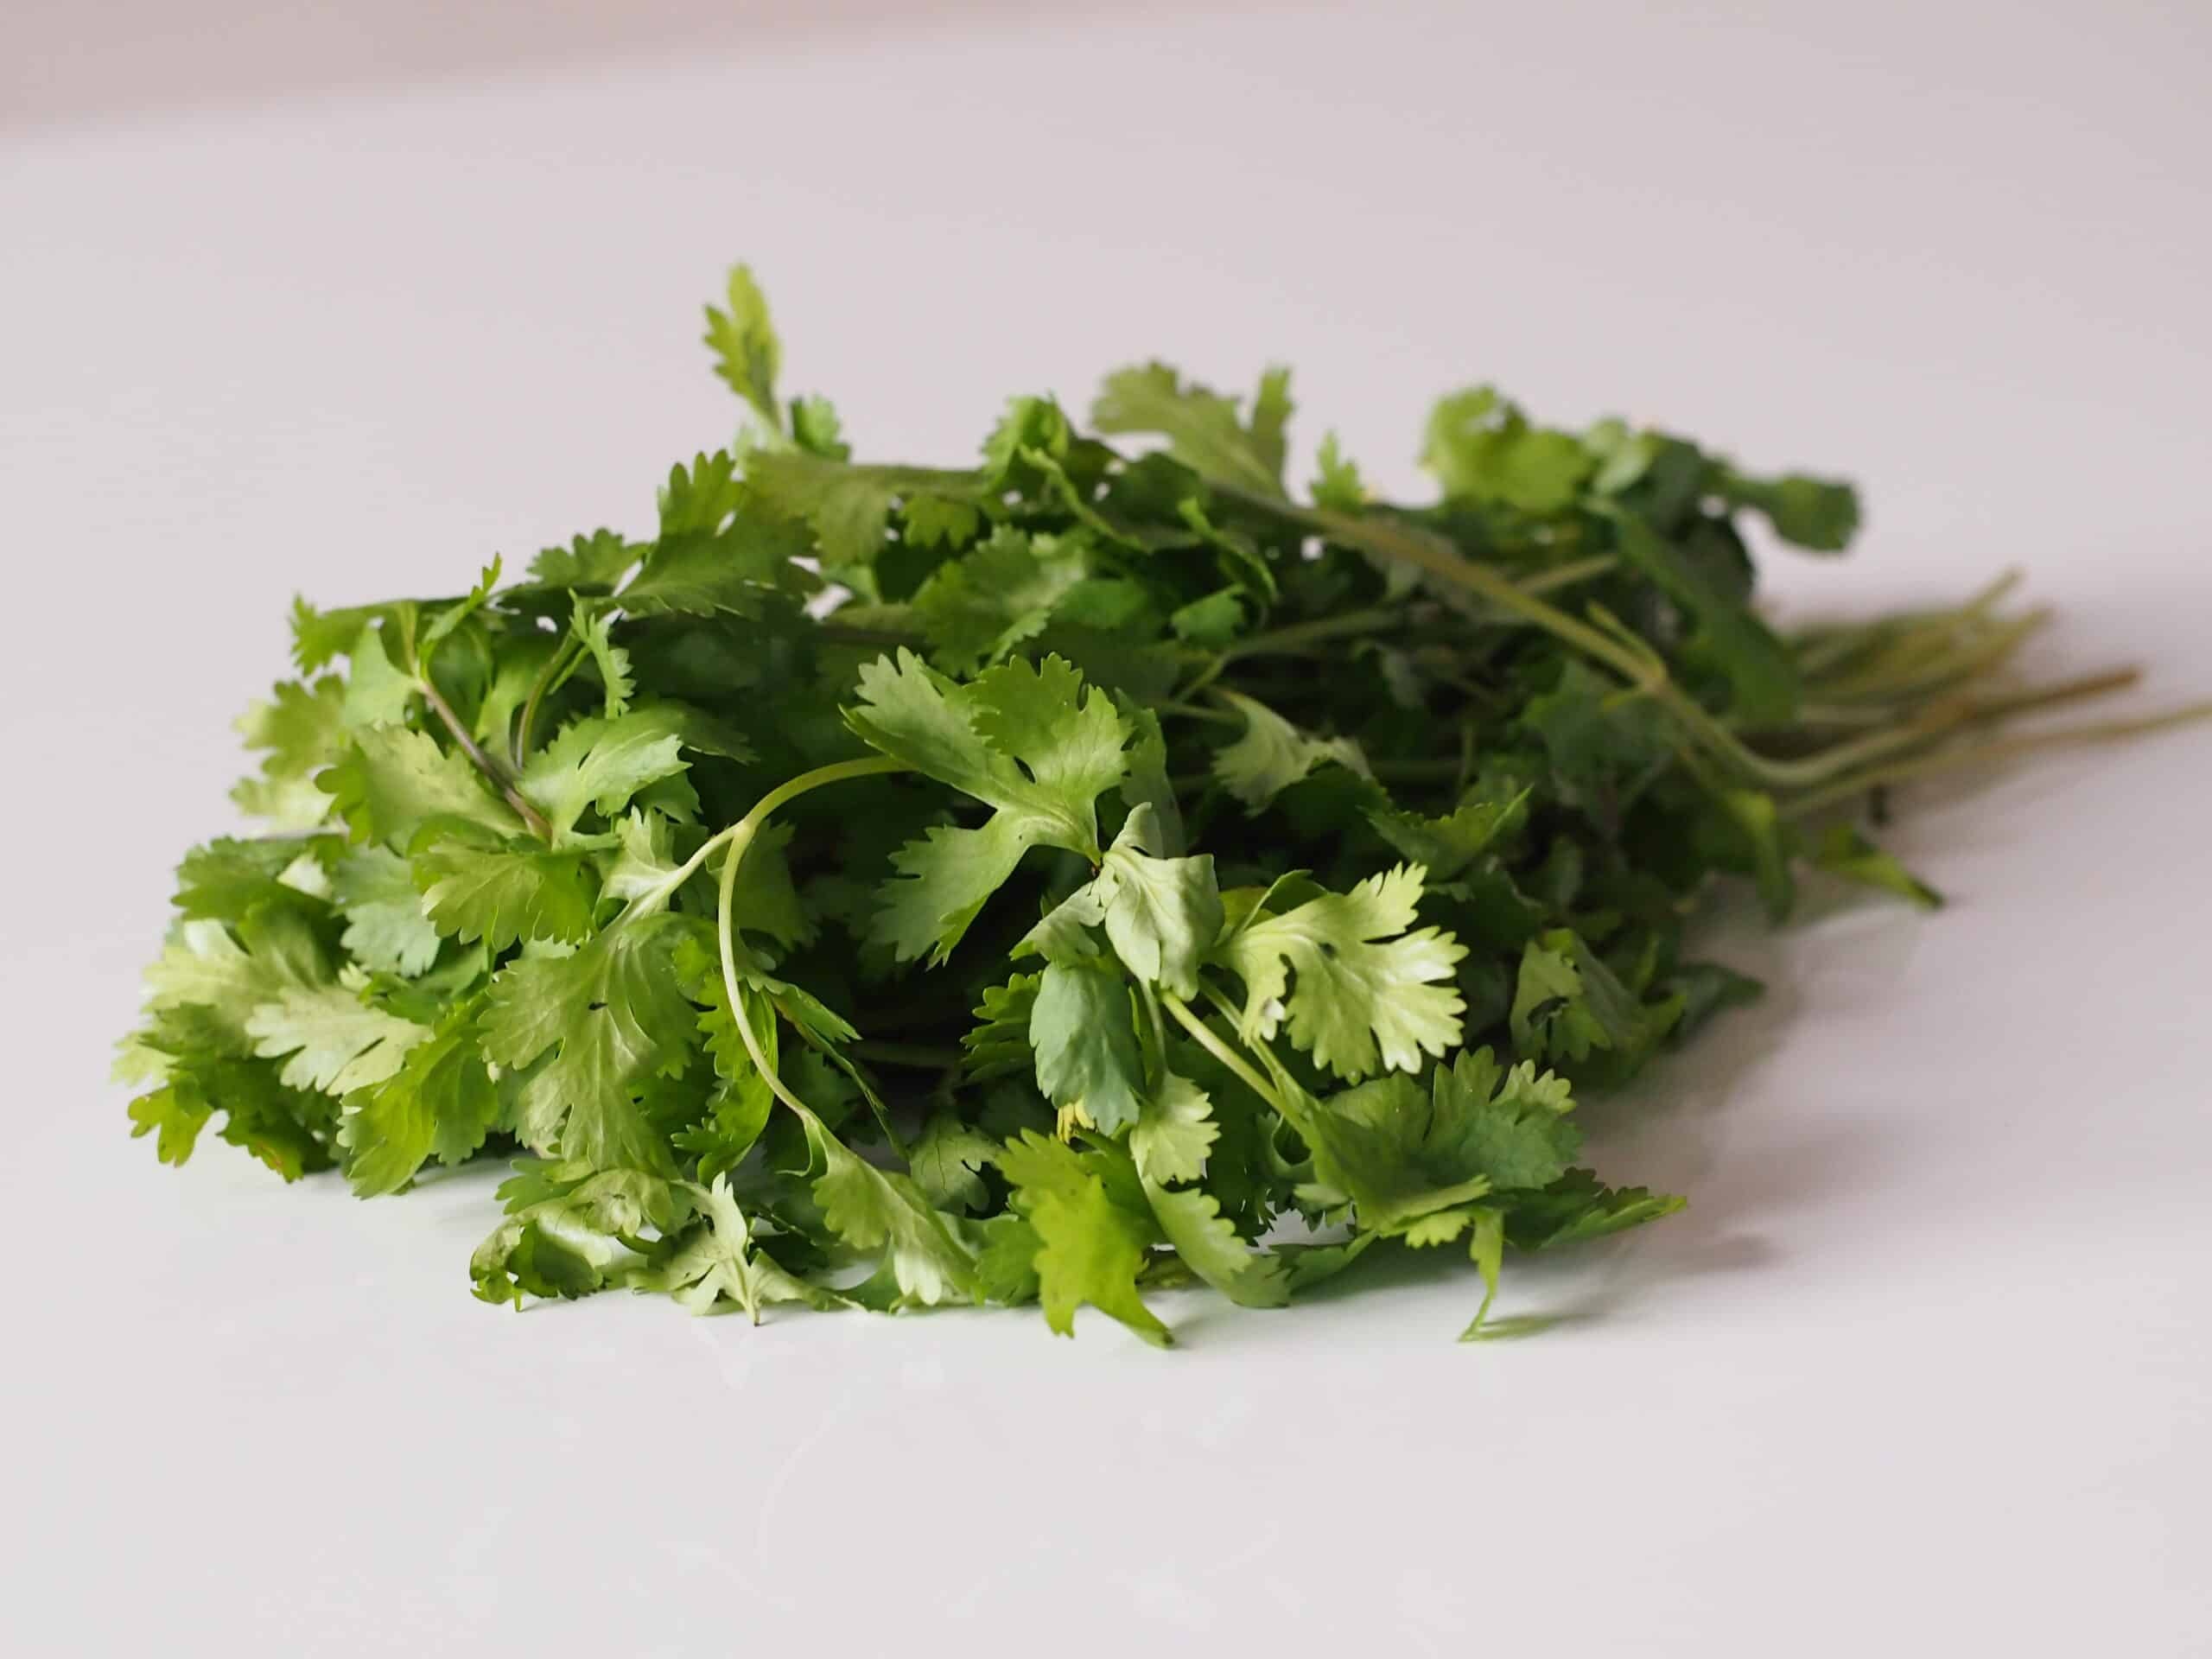 Cilantro for babies, Baby's first foods, Solid starts, Dietary option, 2560x1920 HD Desktop